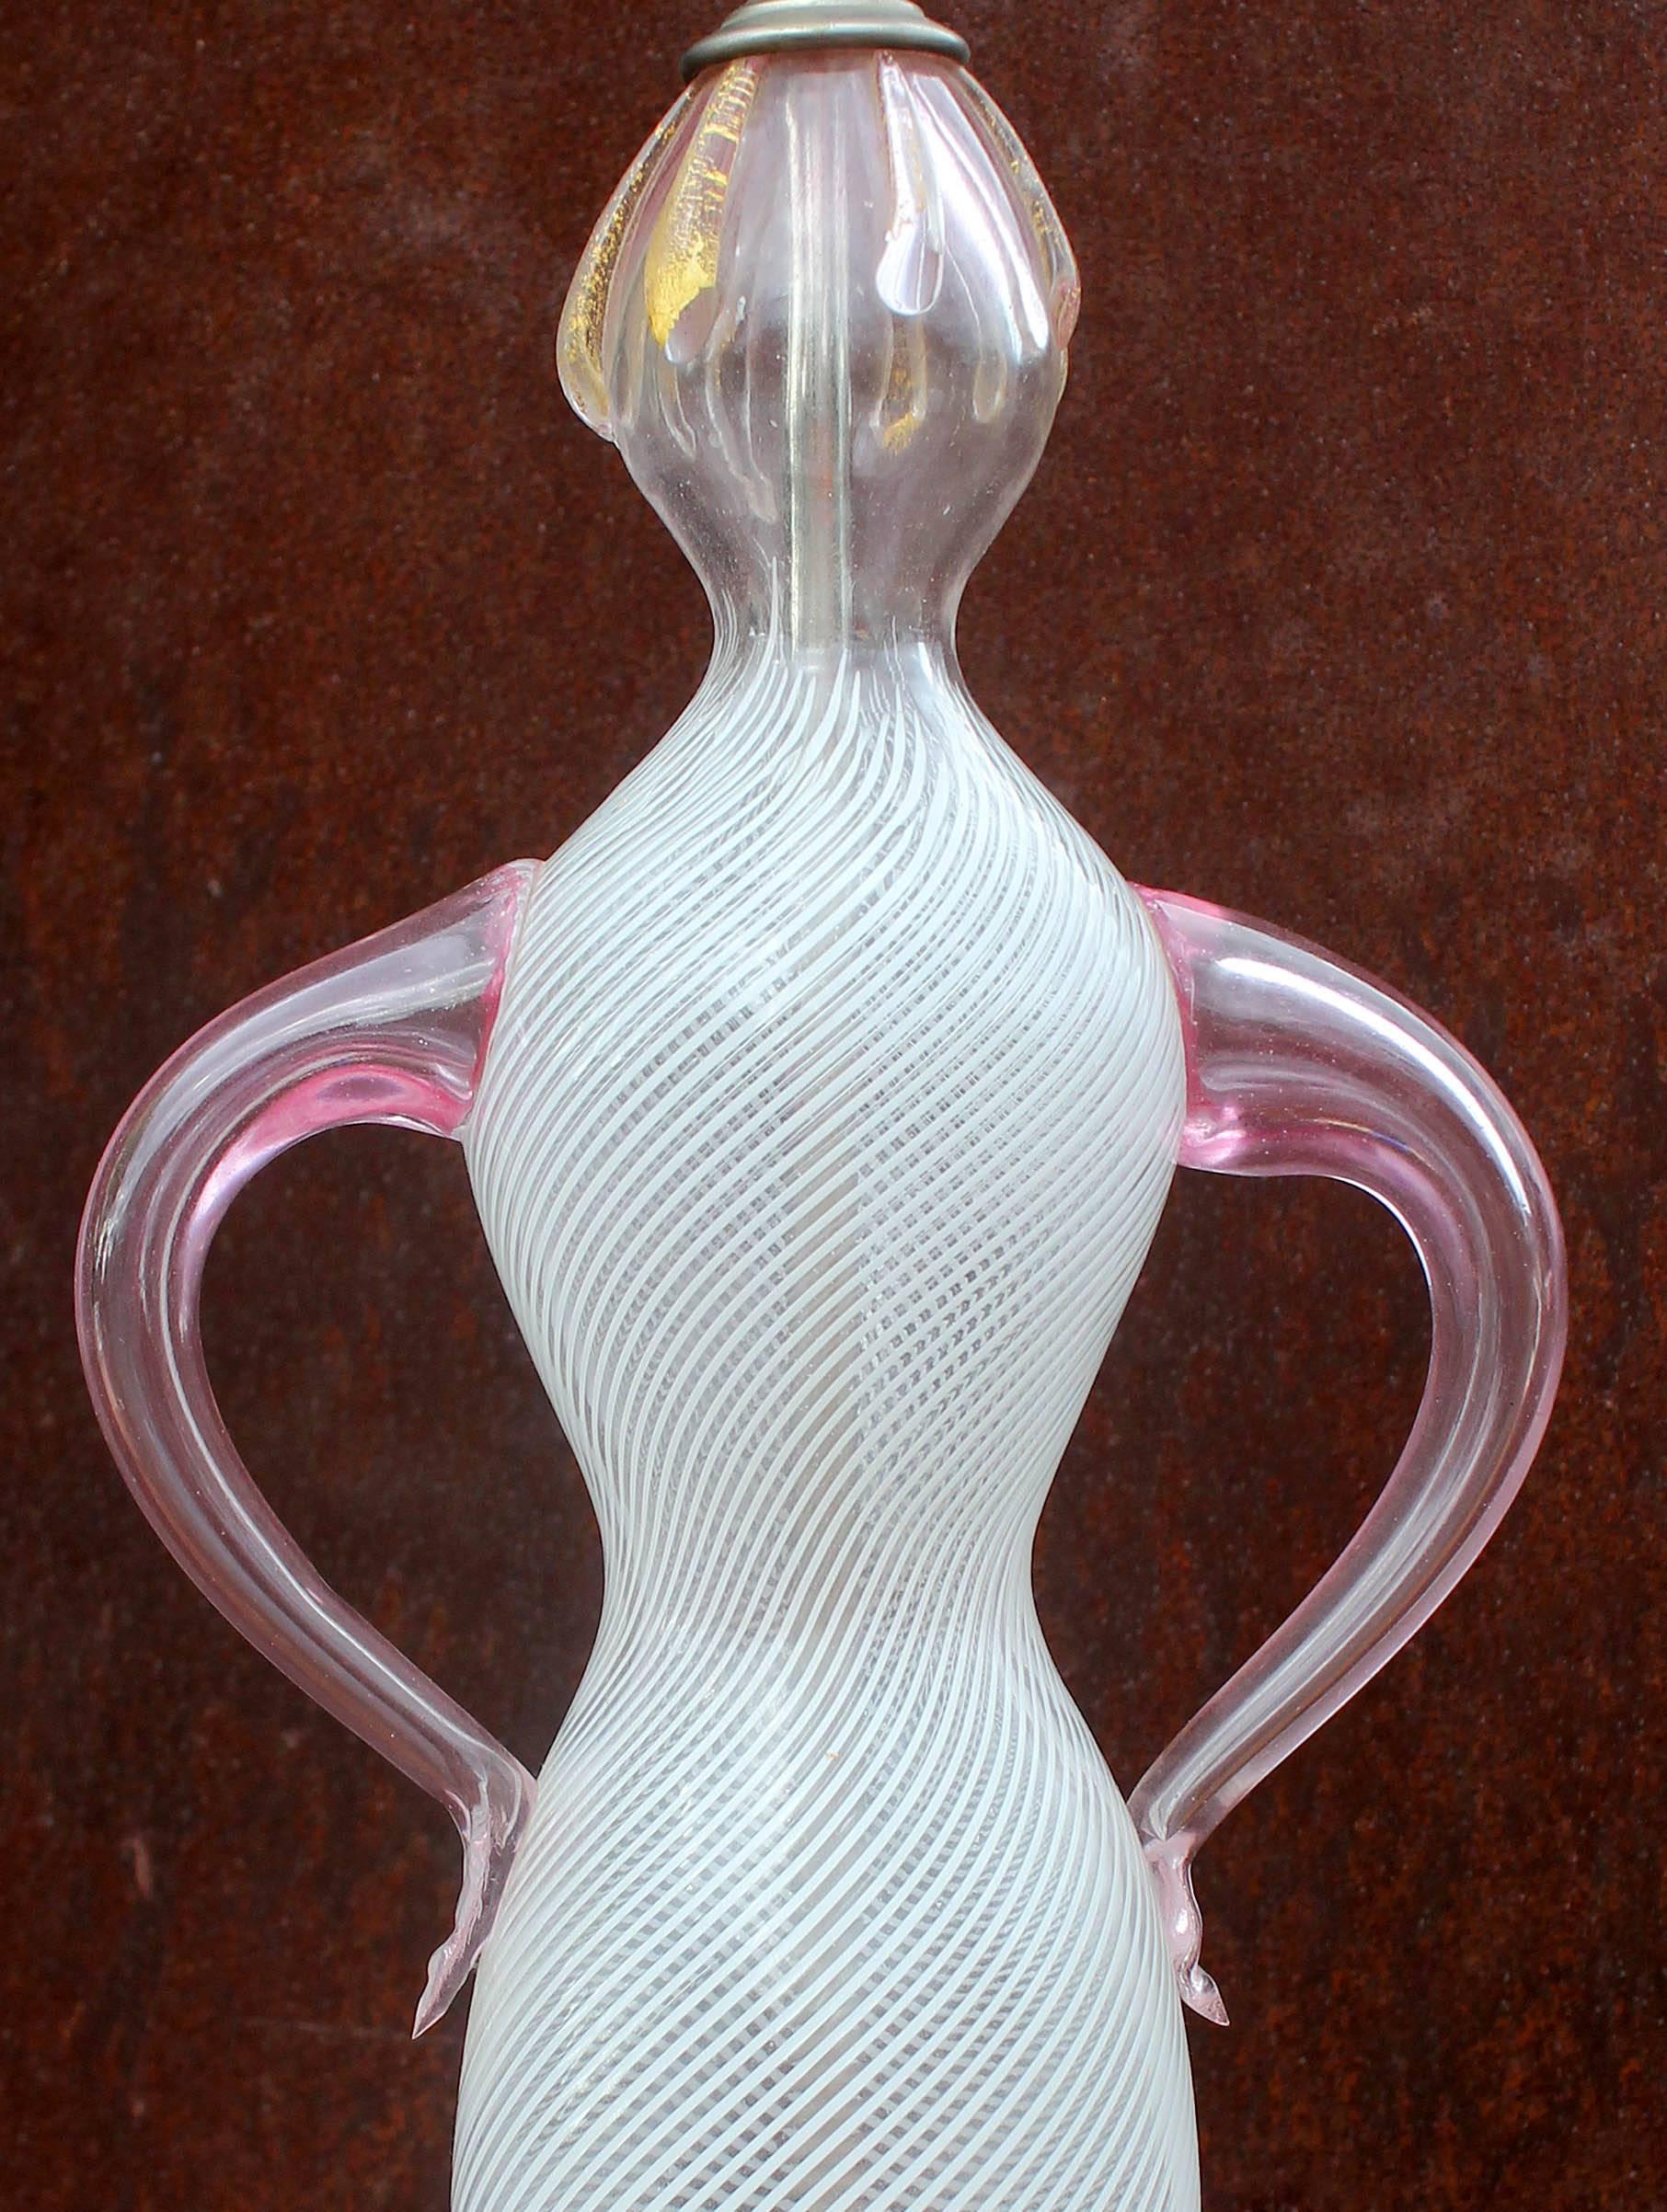 An unusual and possibly unique Murano lamp. A delicate abstract sculpture of a female figure. Purchased by the original owner in 1954. Figure measures 15 1/2